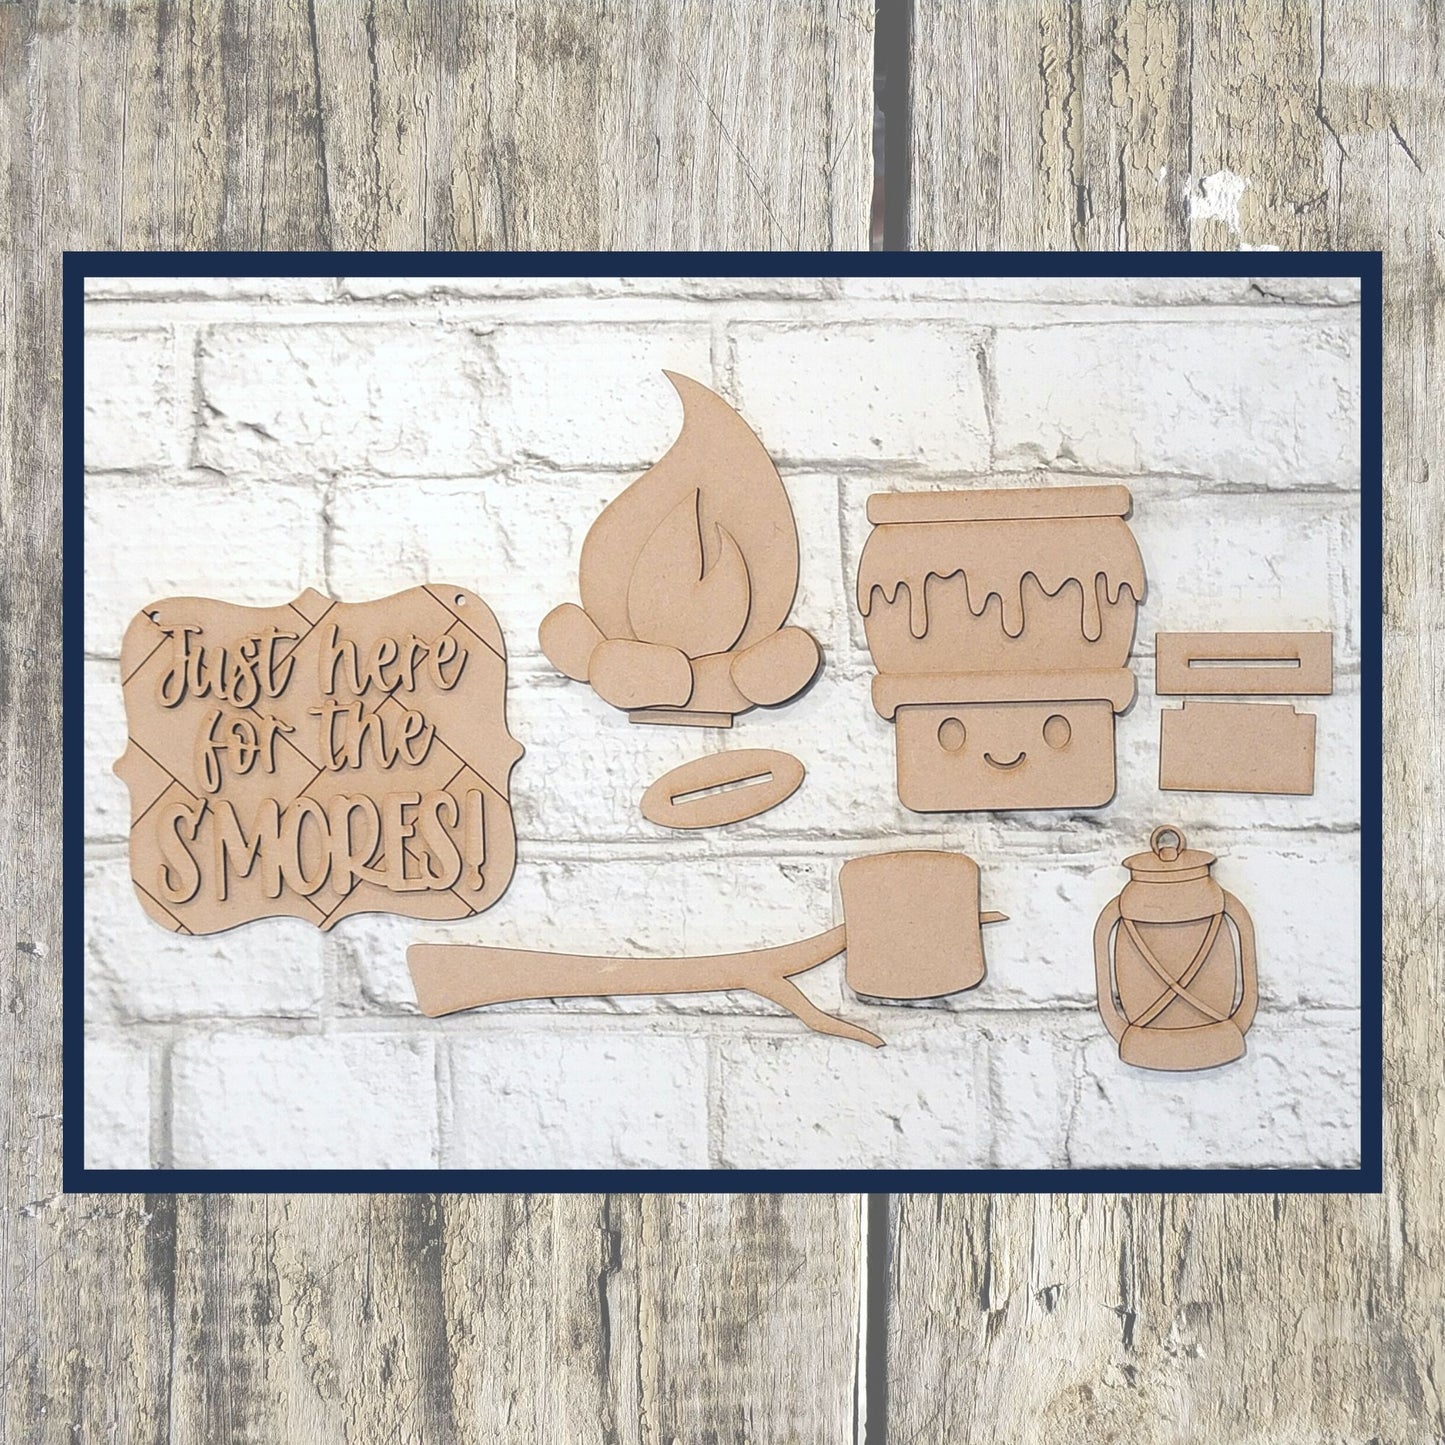 S’mores Wood Tiered tray kit | Chica Tiza